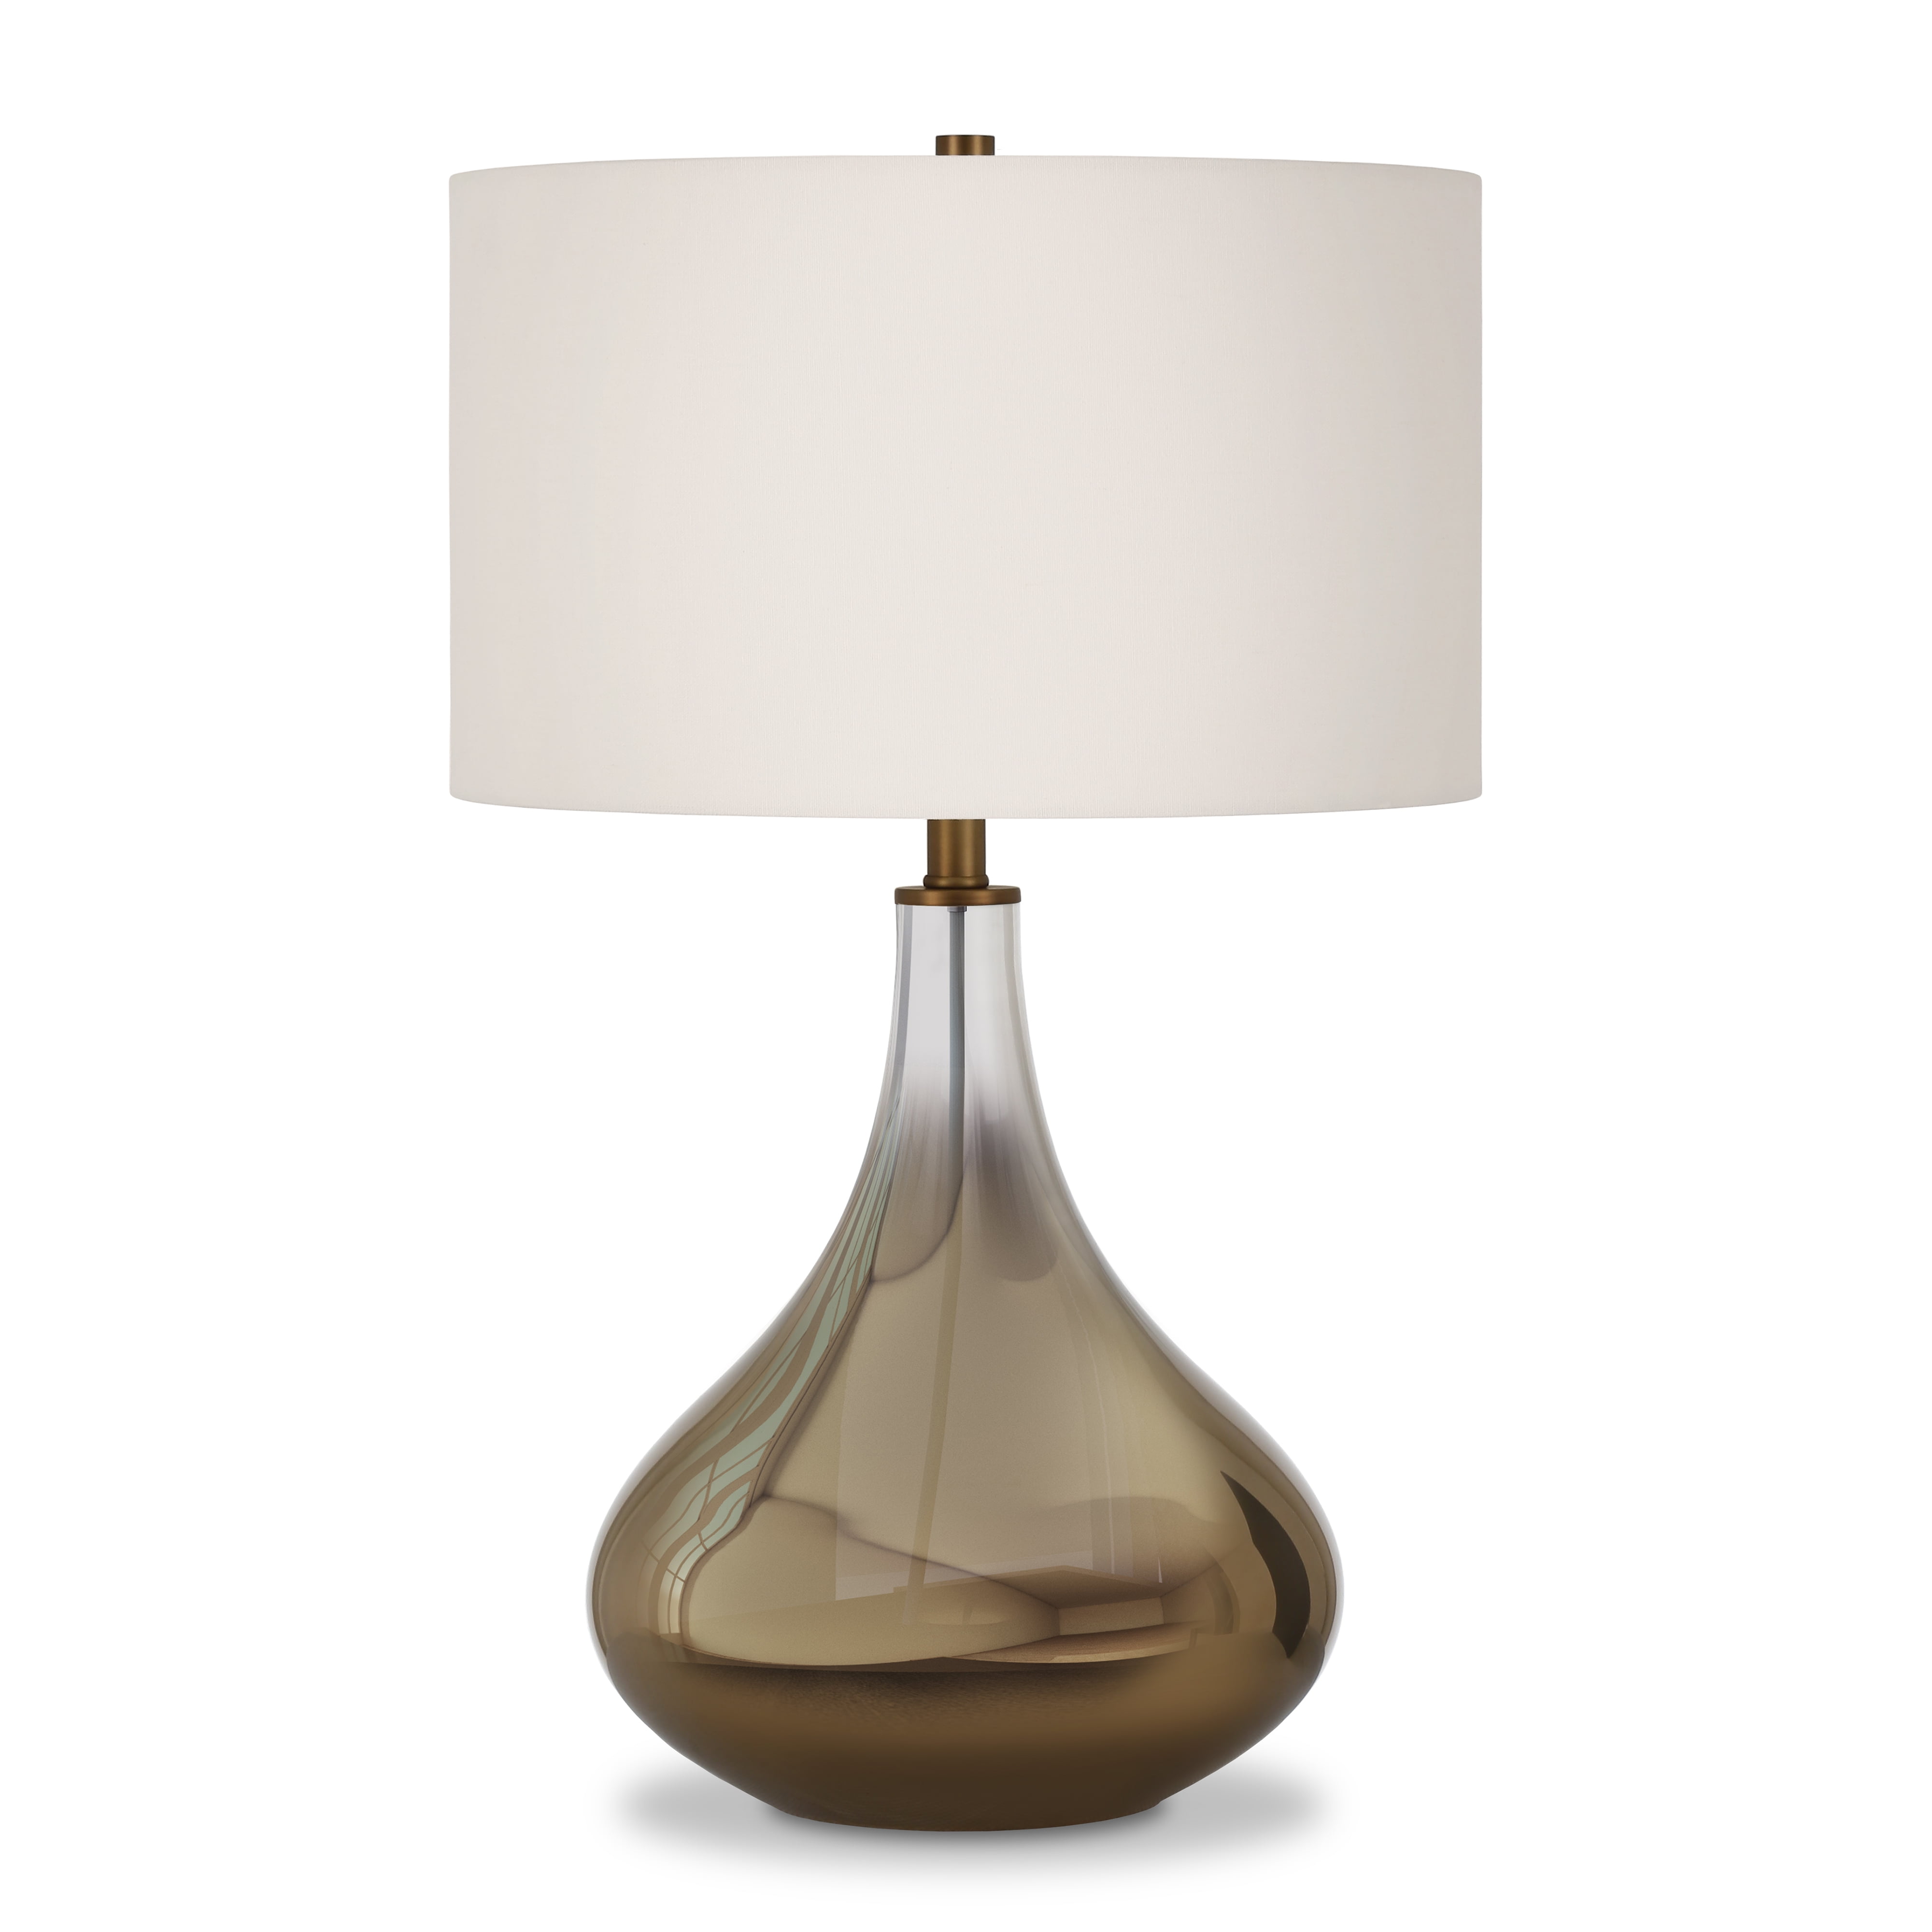 Ceres Modern Glam Table Lamp in Ombre Gold Brass Colored Glass with